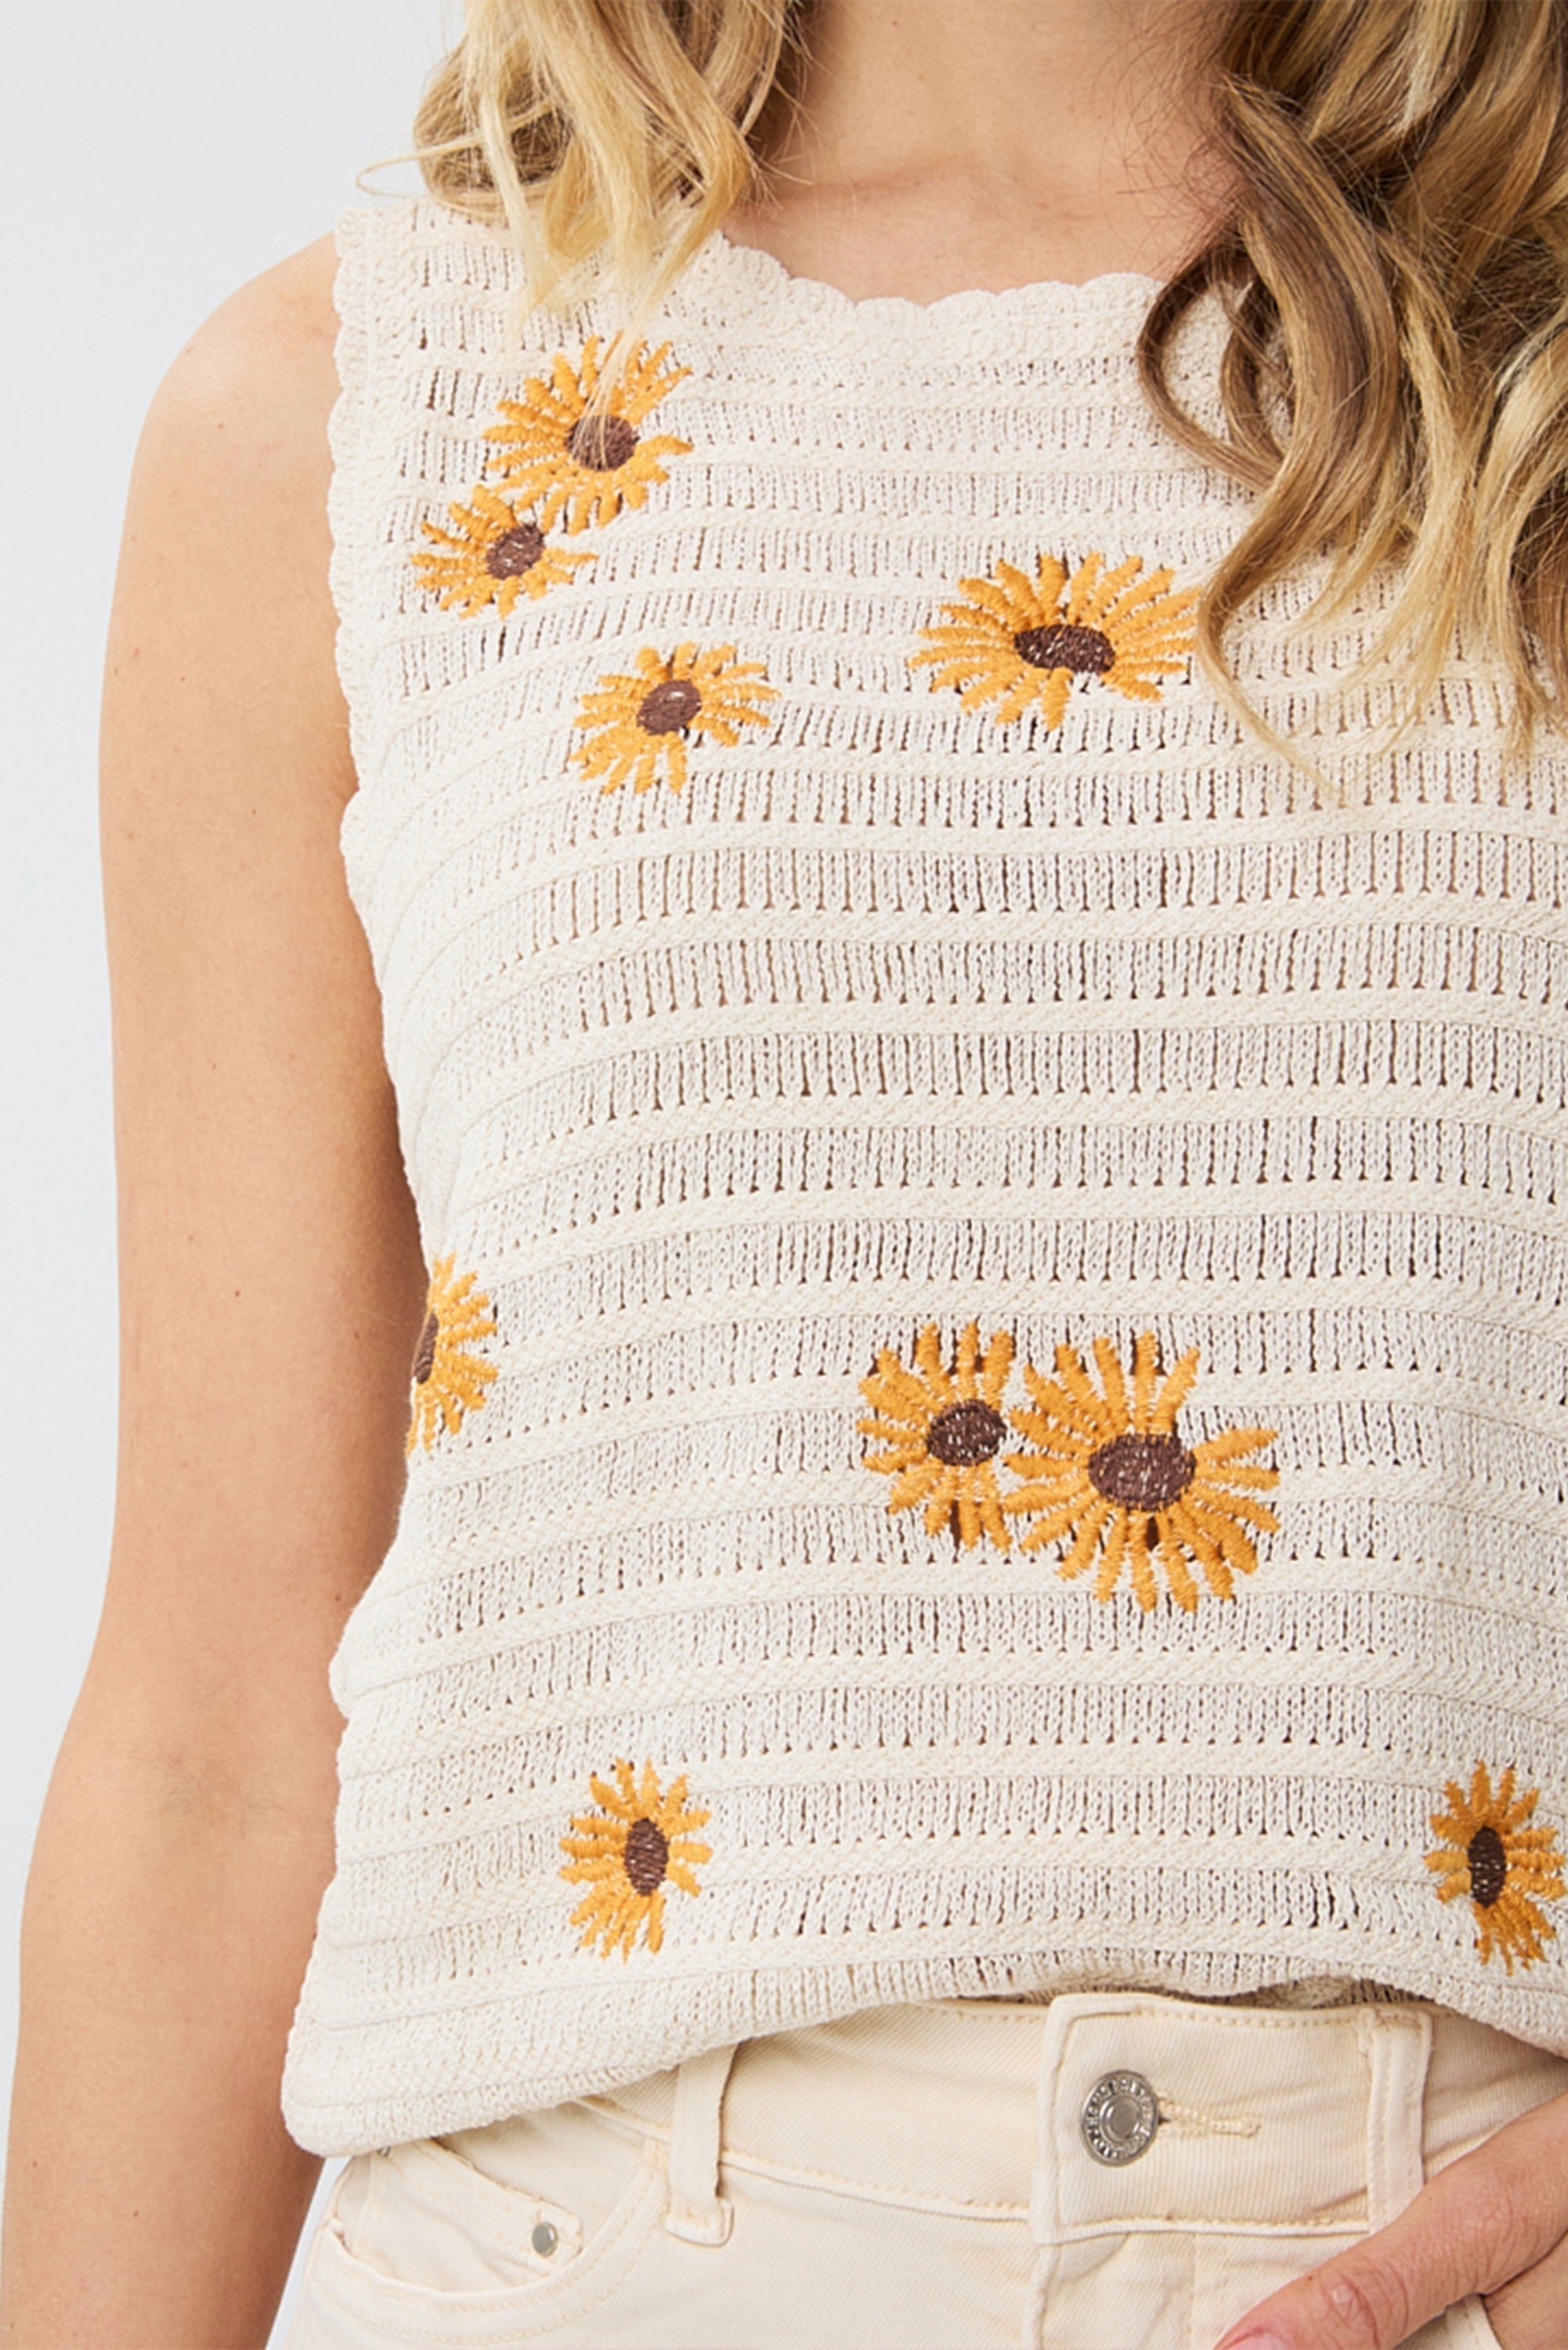 Esqualo Canada (HS2402201) Women's Sleeveless Daisy Embroider Knit Tank Top in a Natural /beige open knit cotton with yellow flowers